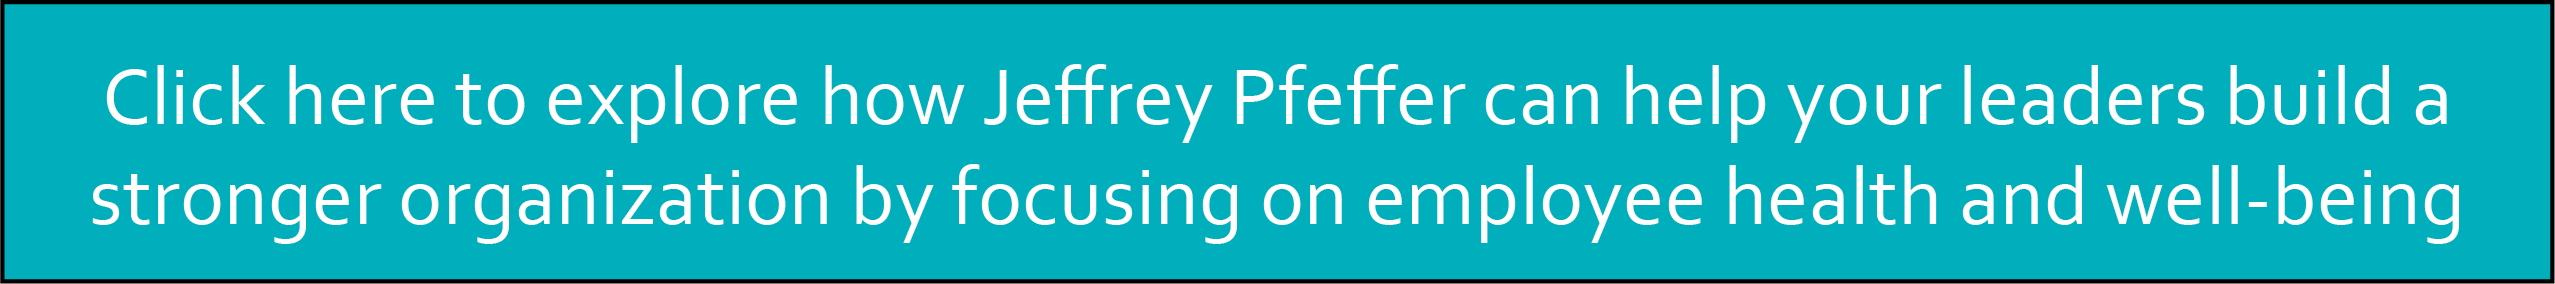 Click here to explore how Jeffrey Pfeffer can help your leaders build a stronger organization by focusing on employee health and well-being